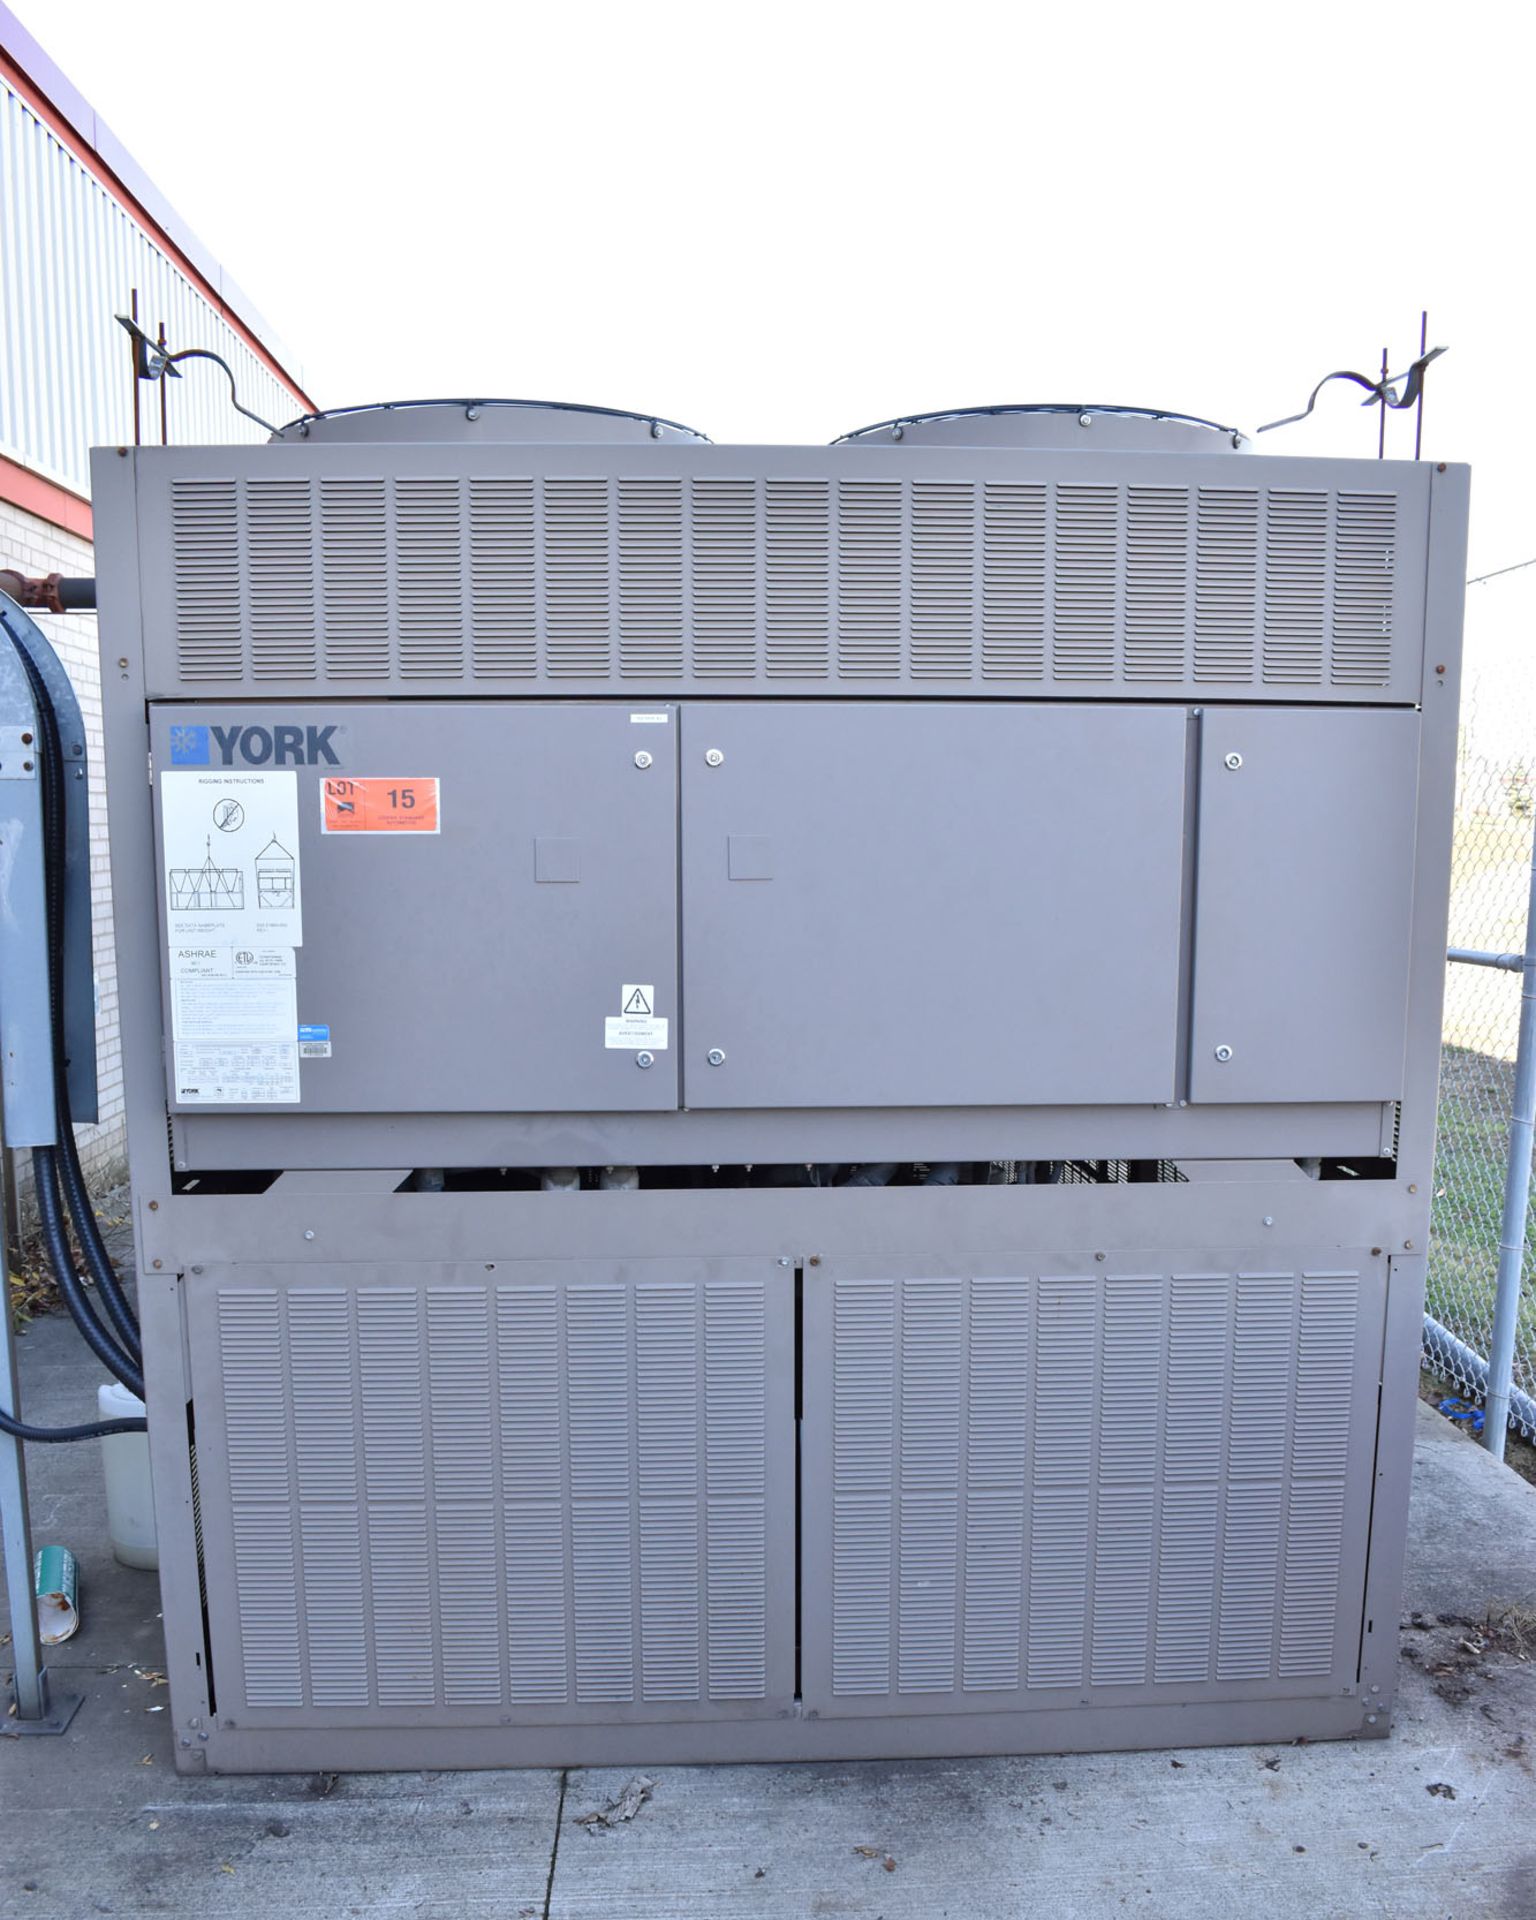 YORK (2011) INDUSTRIAL LIQUID CHILLER SYSTEM WITH 135 TON CAPACITY, BUILT-IN CONDENSER, BERG